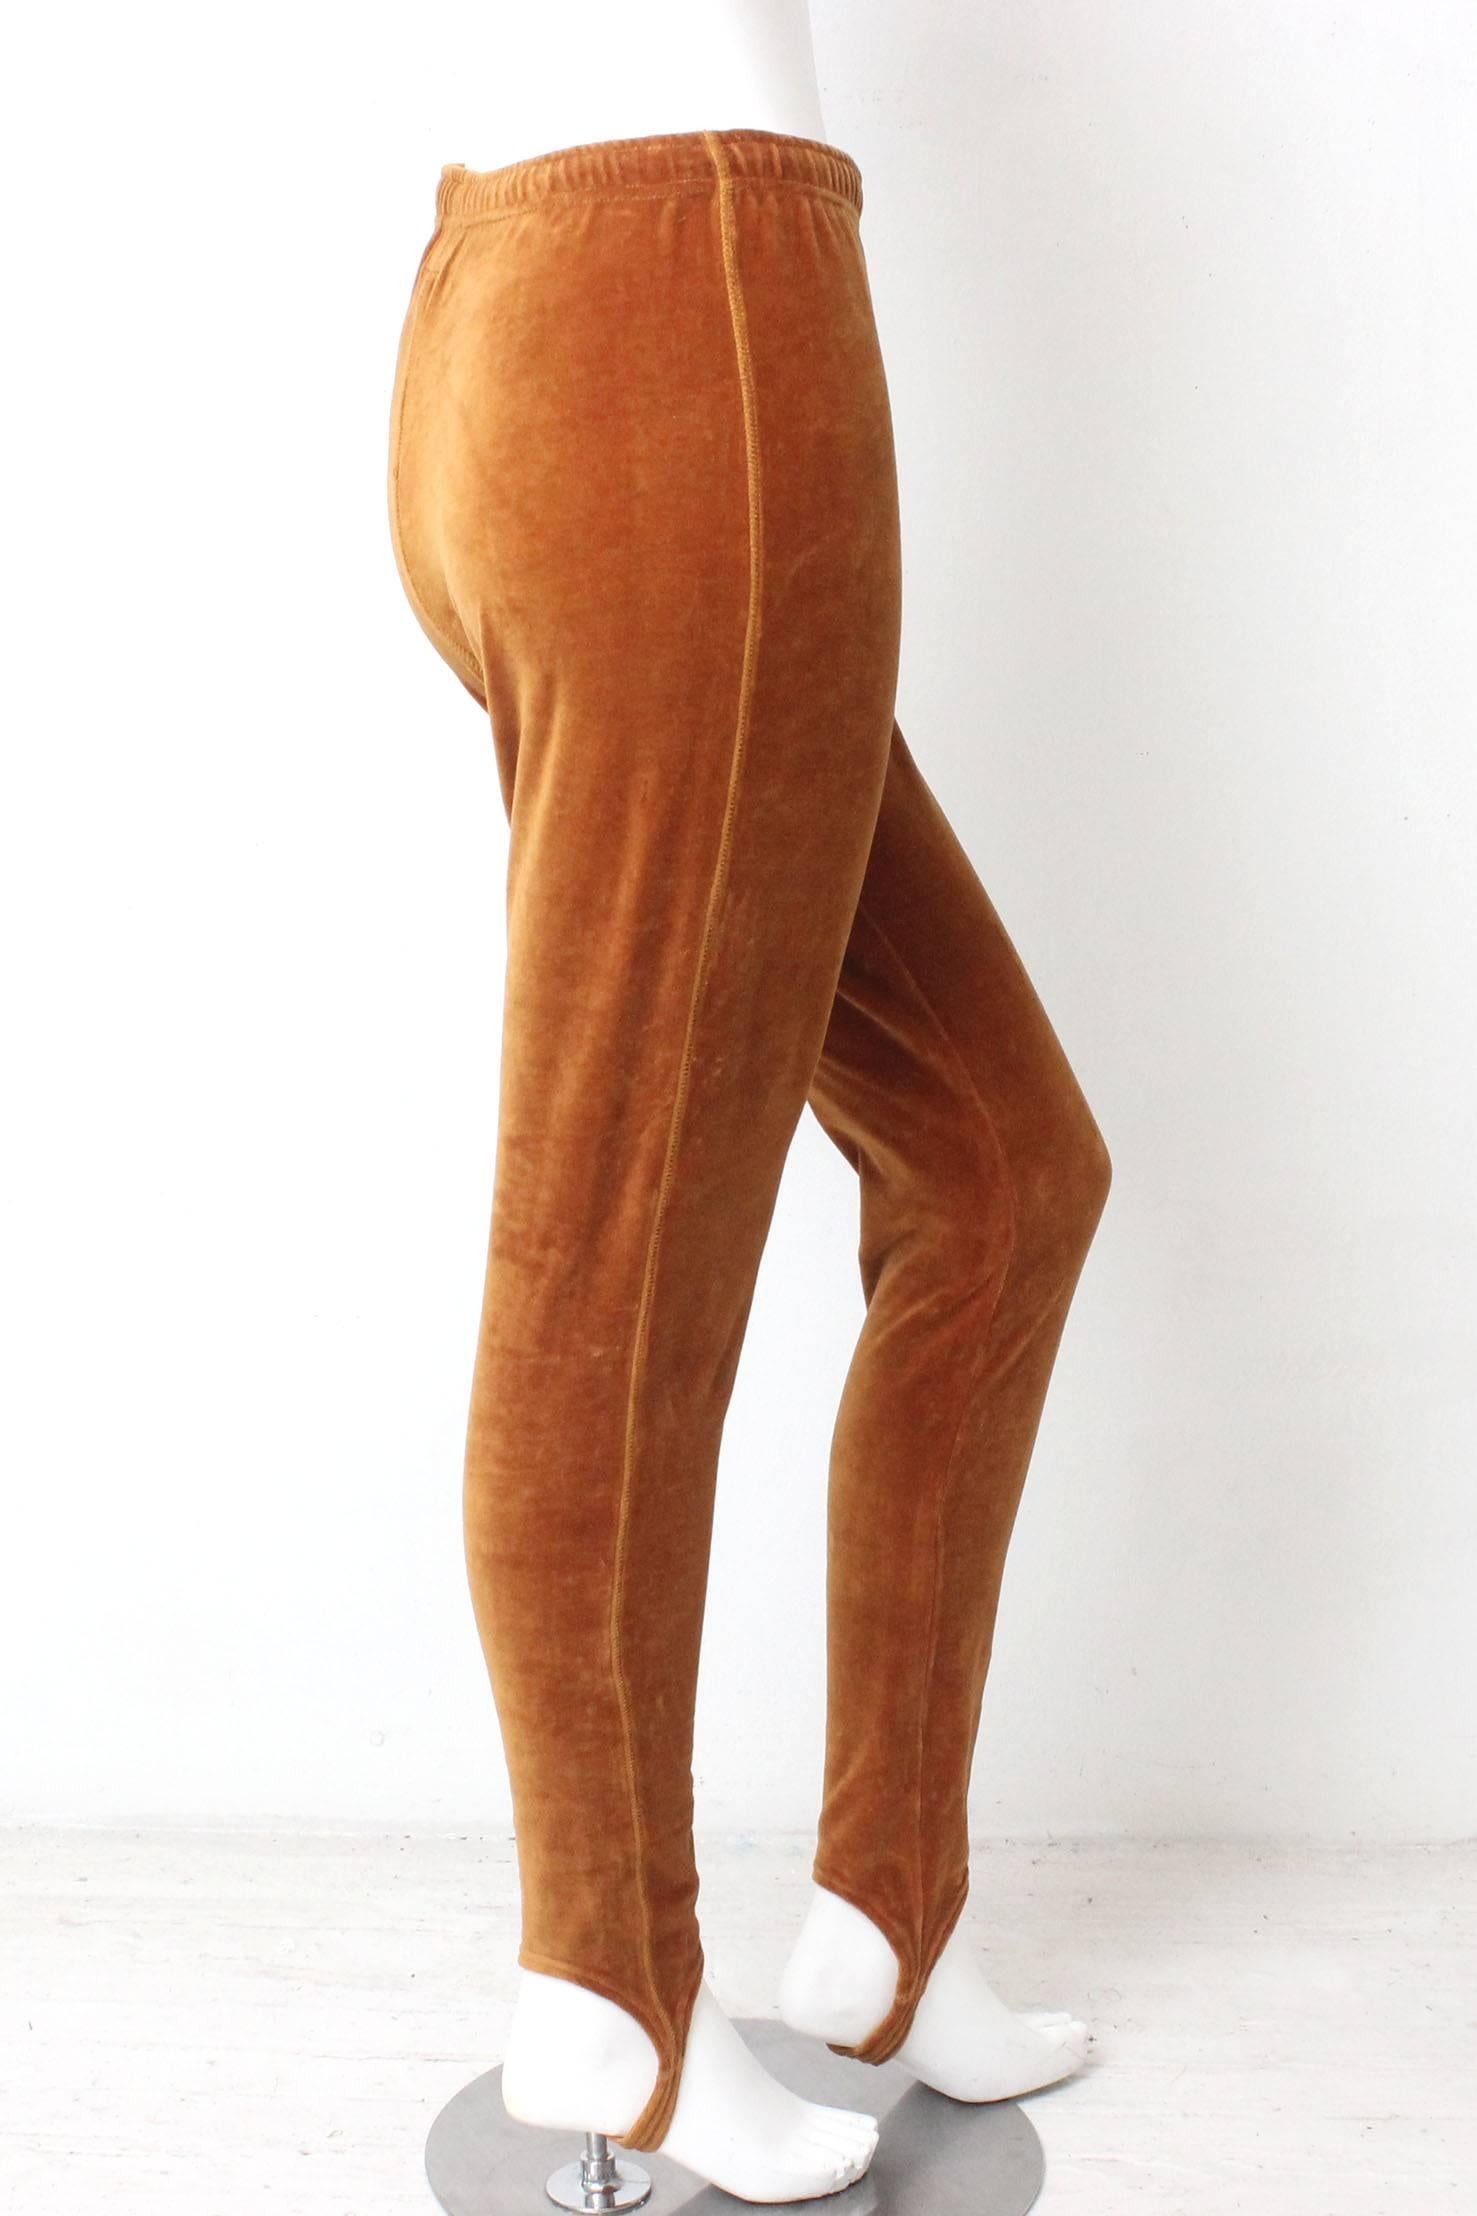 This pair of Moschino Jeans stirrup pants are a twist on a jogging pant. The fabric is a lush velour in a burnished orangy
gold hue.  The silhouette is long and lean with a fit similar to a legging but with a stirrup bottom. There is a drawstring